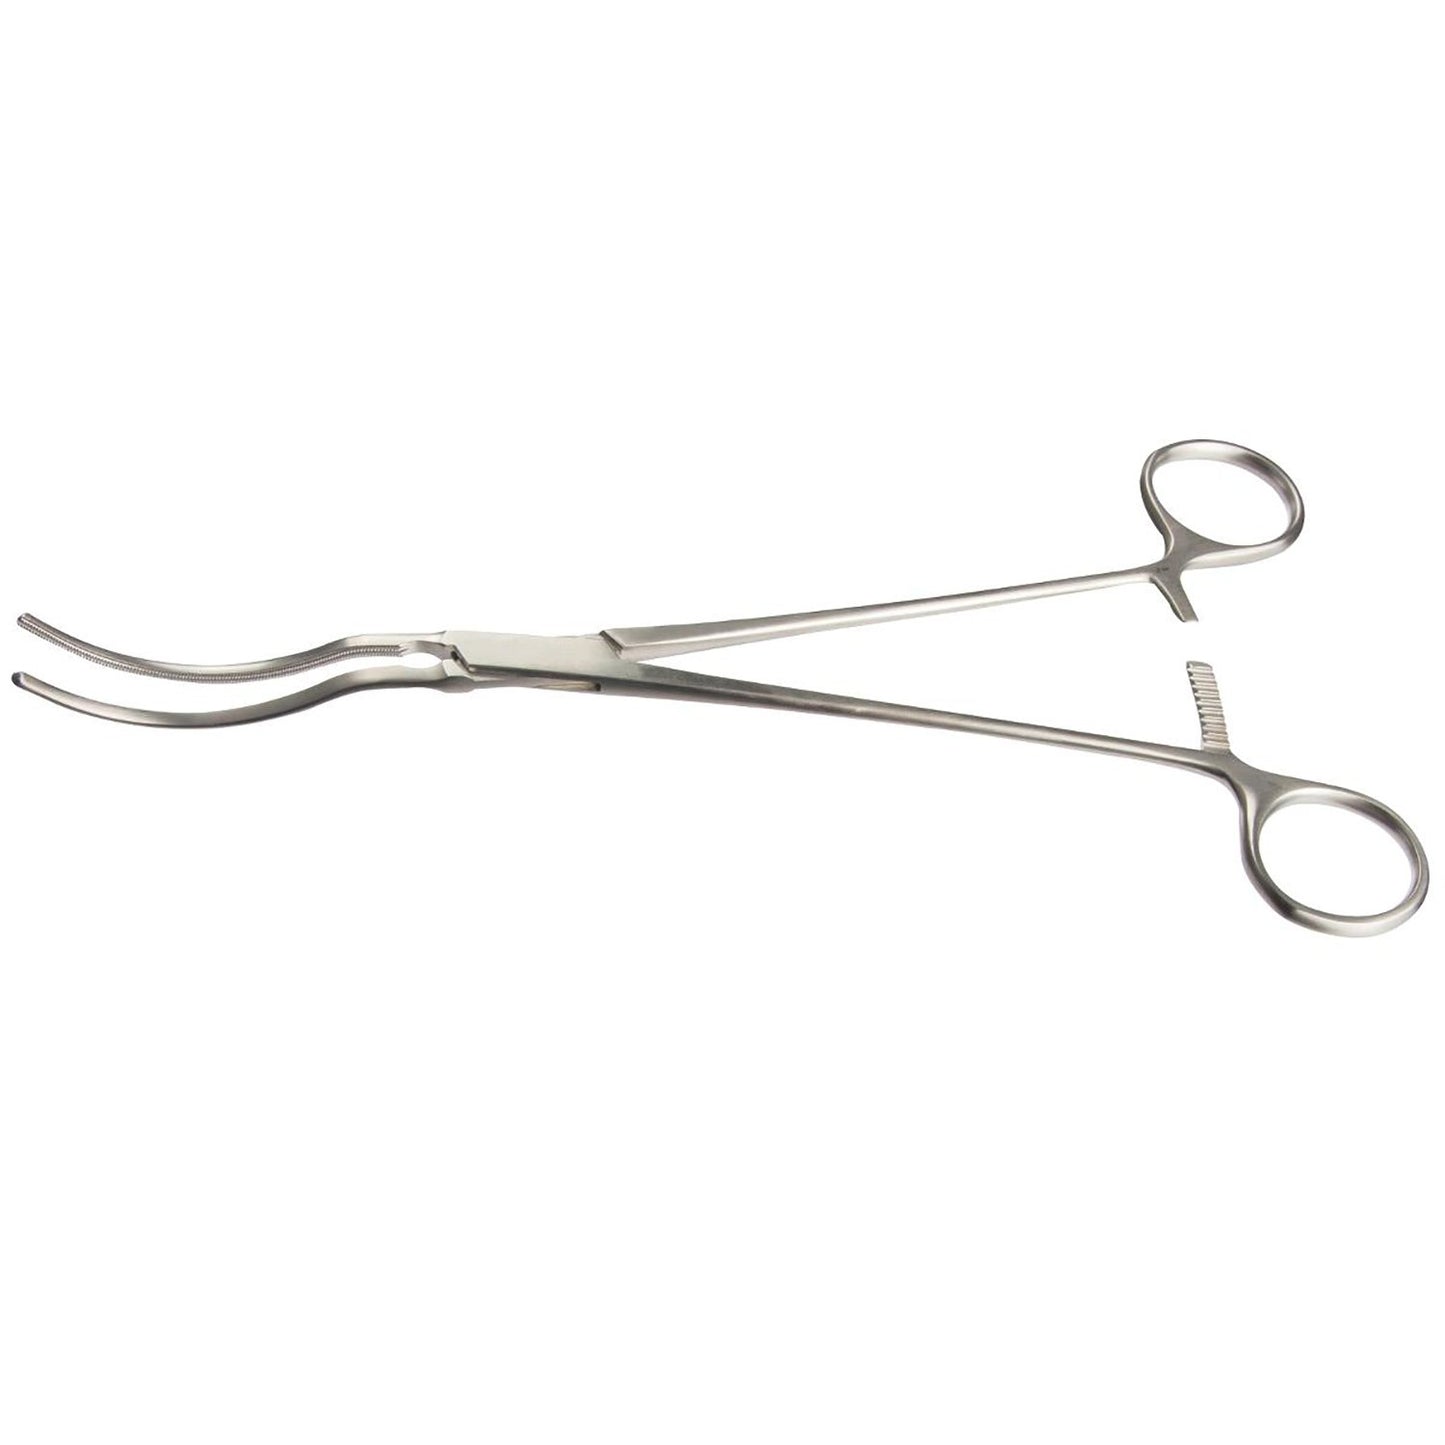 Glover Spoon-shaped Forceps